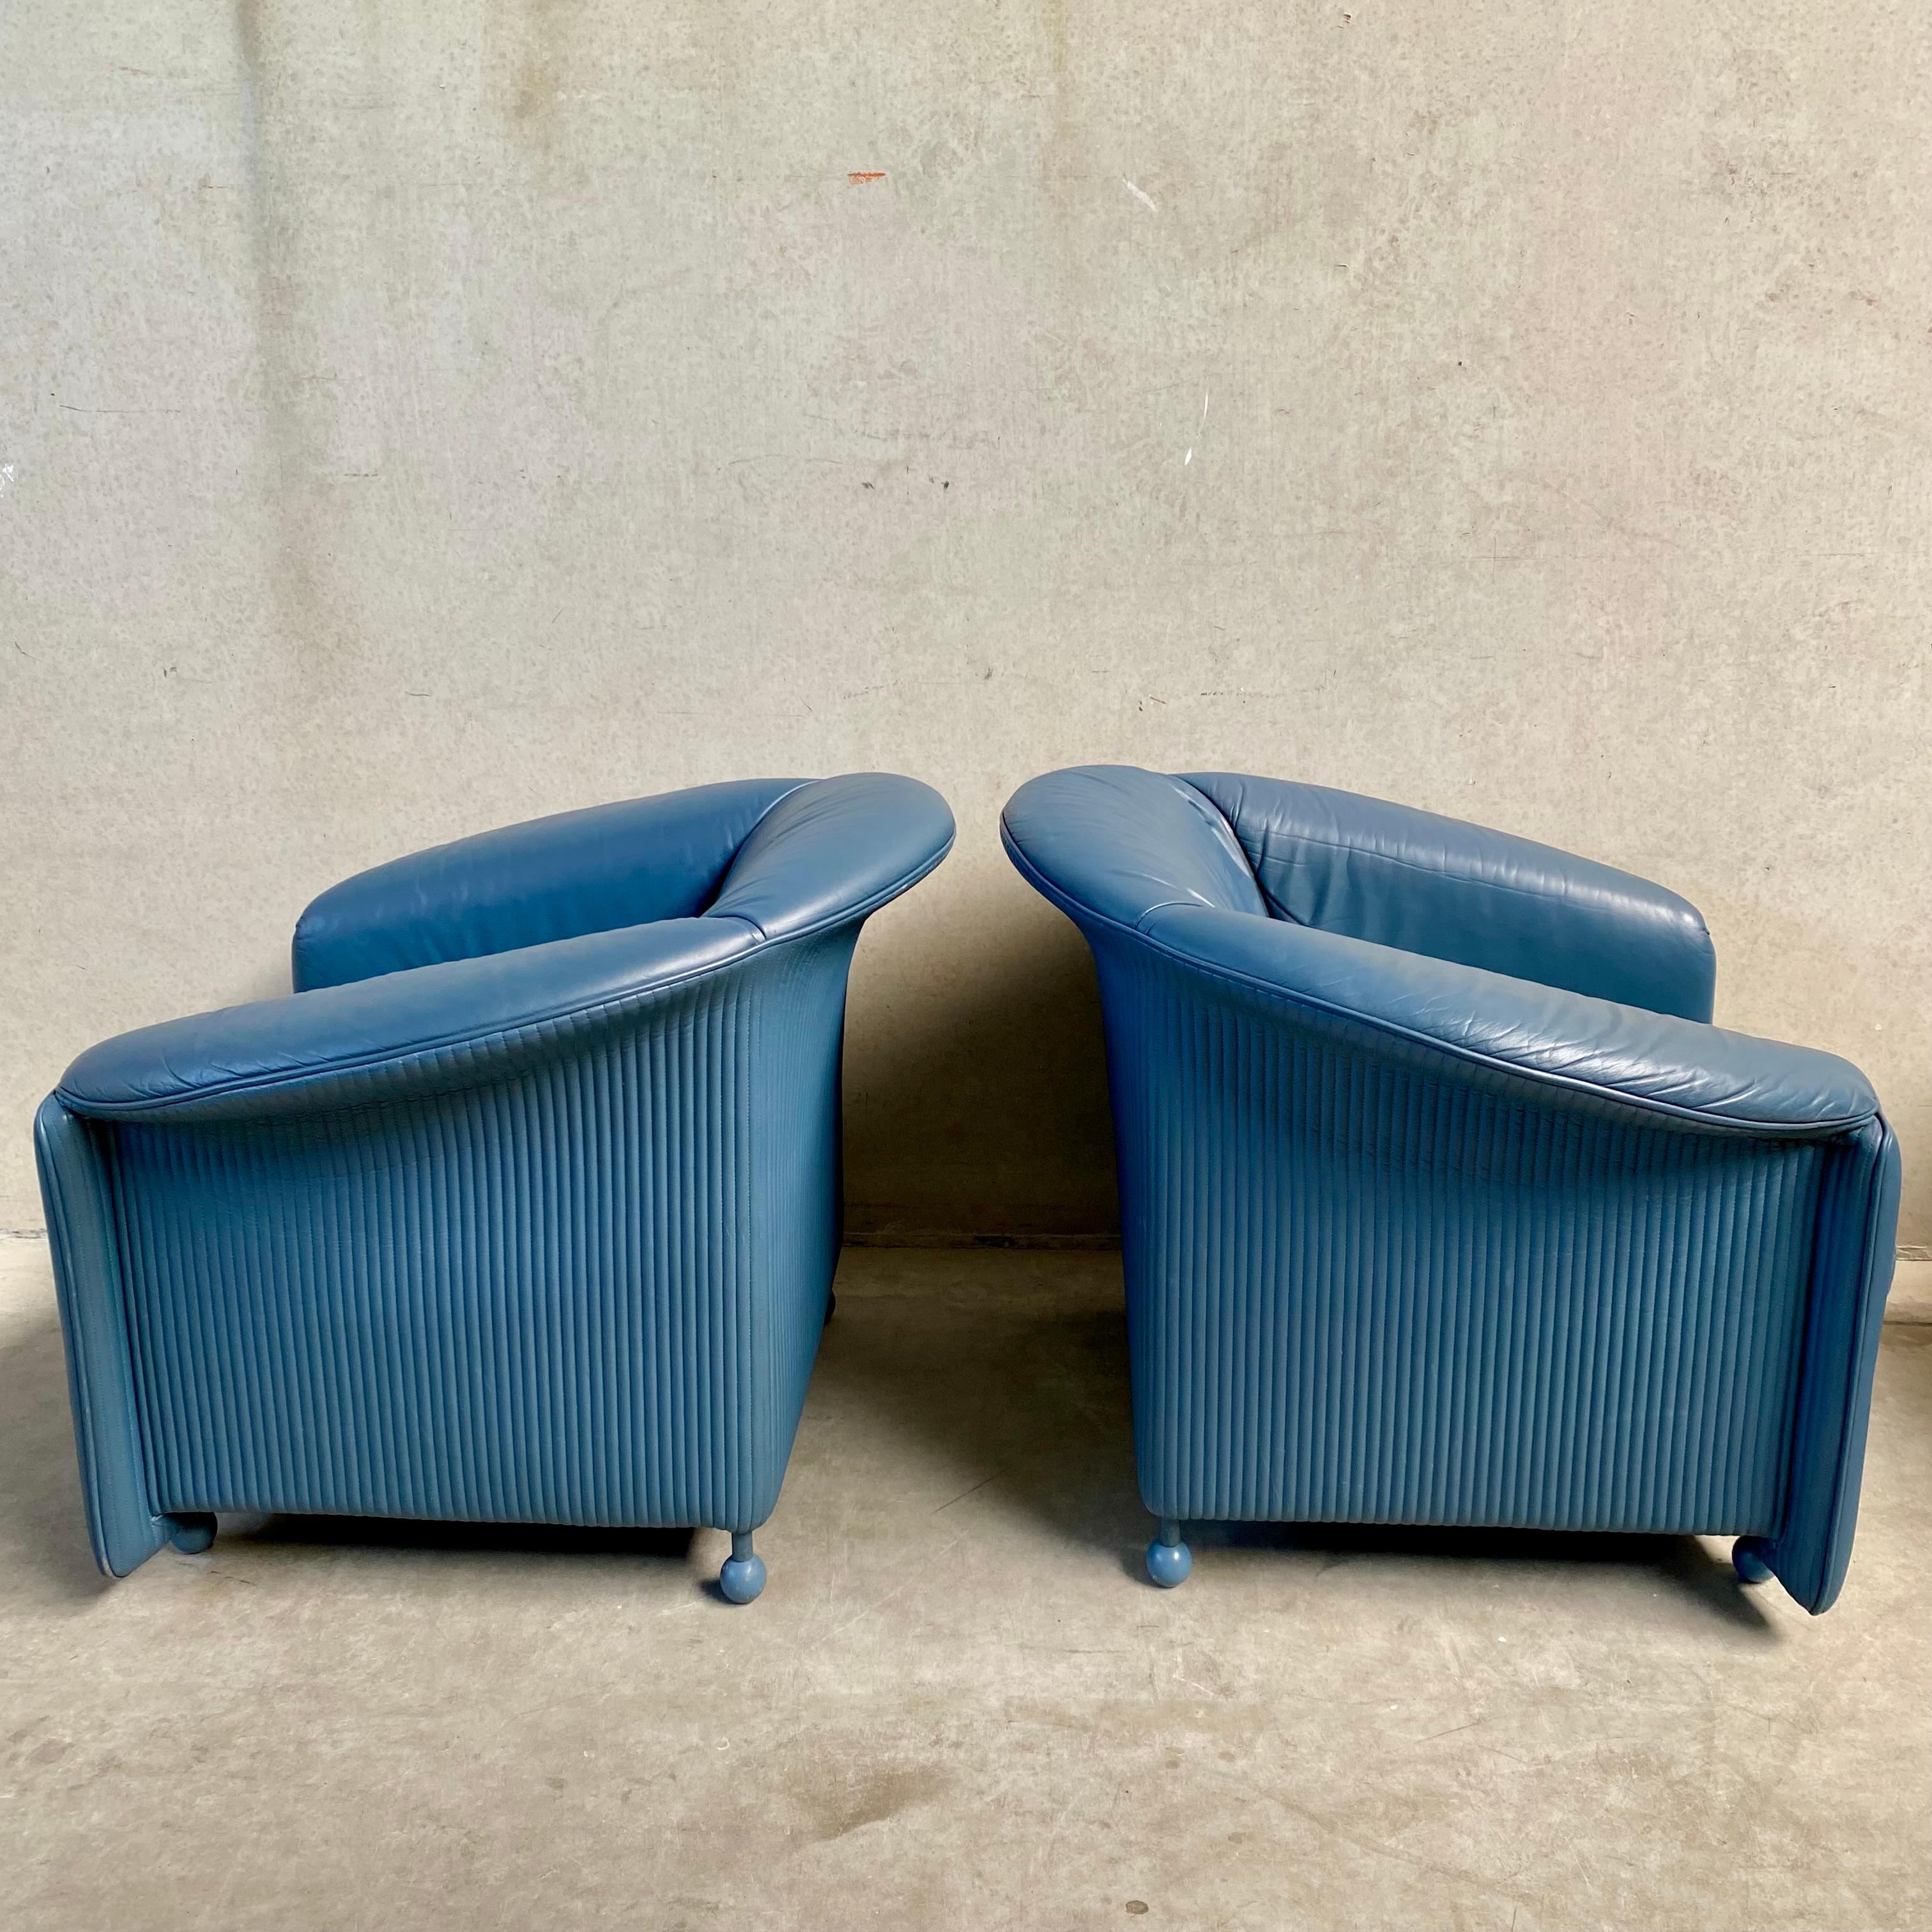 Set of 2 Vintage Leather Arm Chairs by Paolo Piva for Wittmann, Austria 1980s For Sale 7